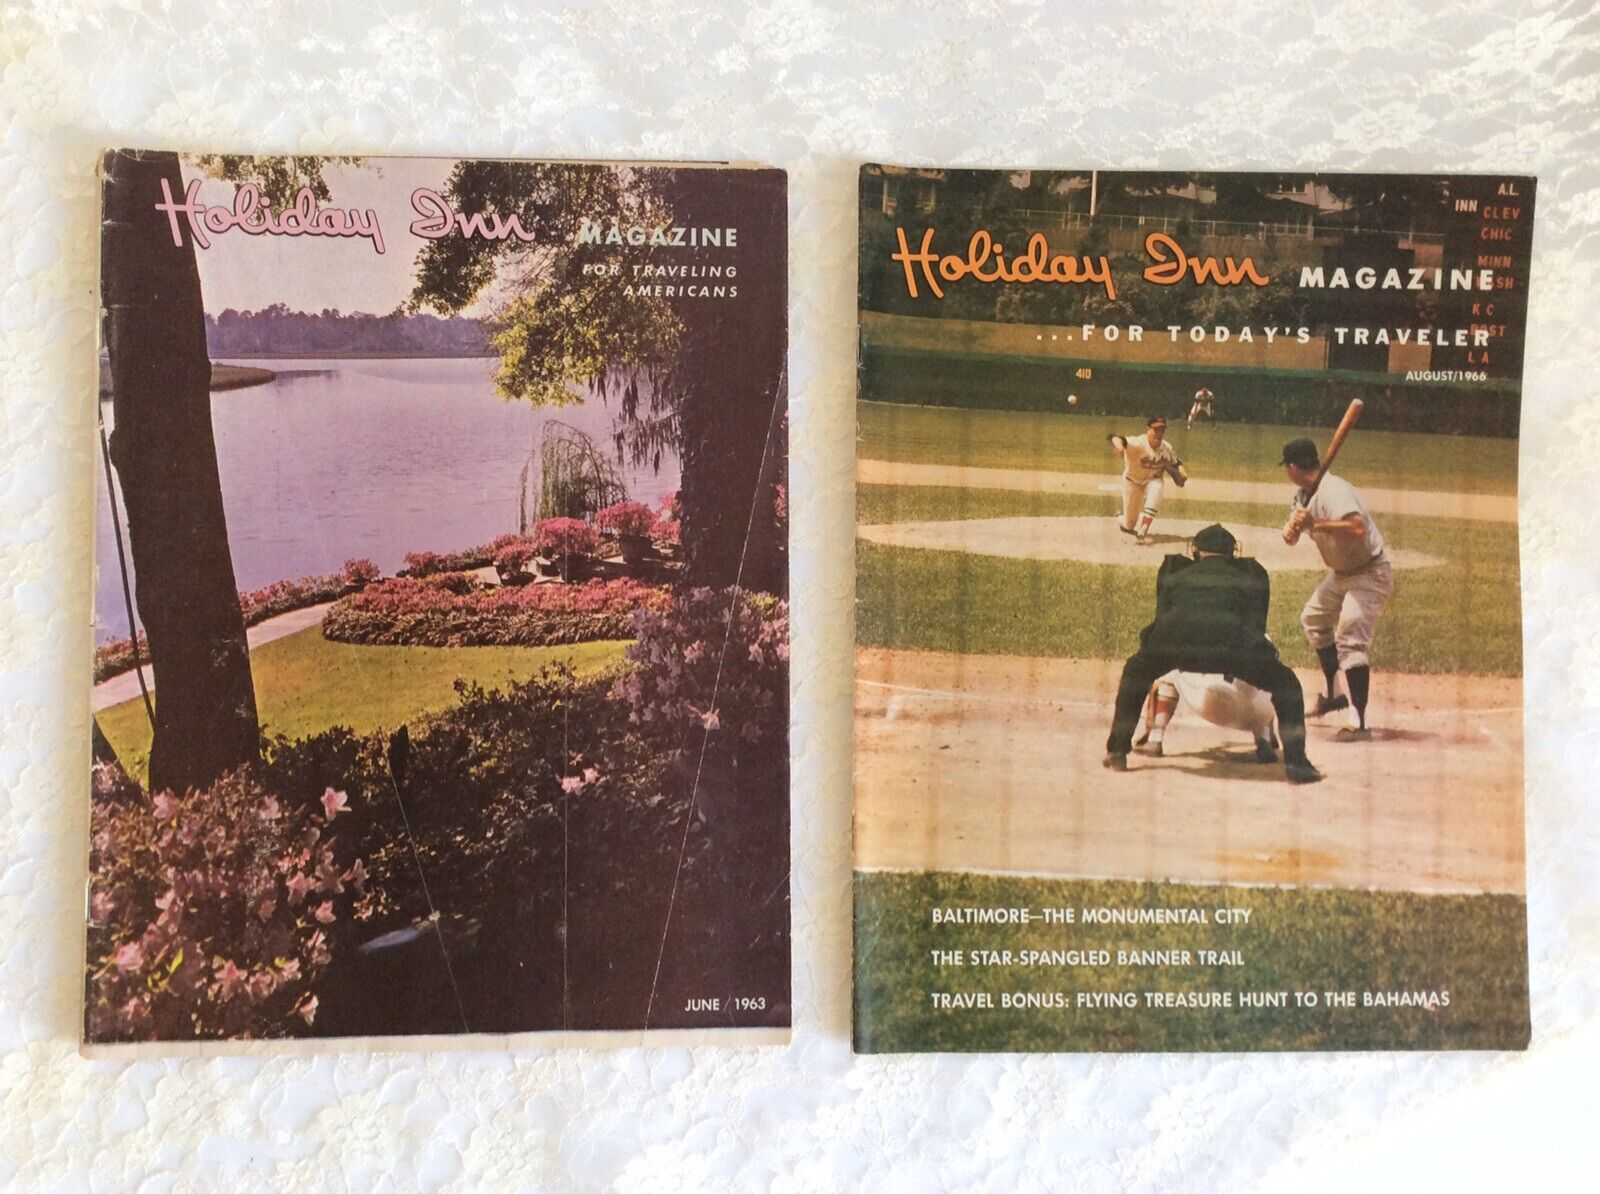 Holiday Inn Magazines For Traveling America 2 Issues. Vintage. 1963 & 1966